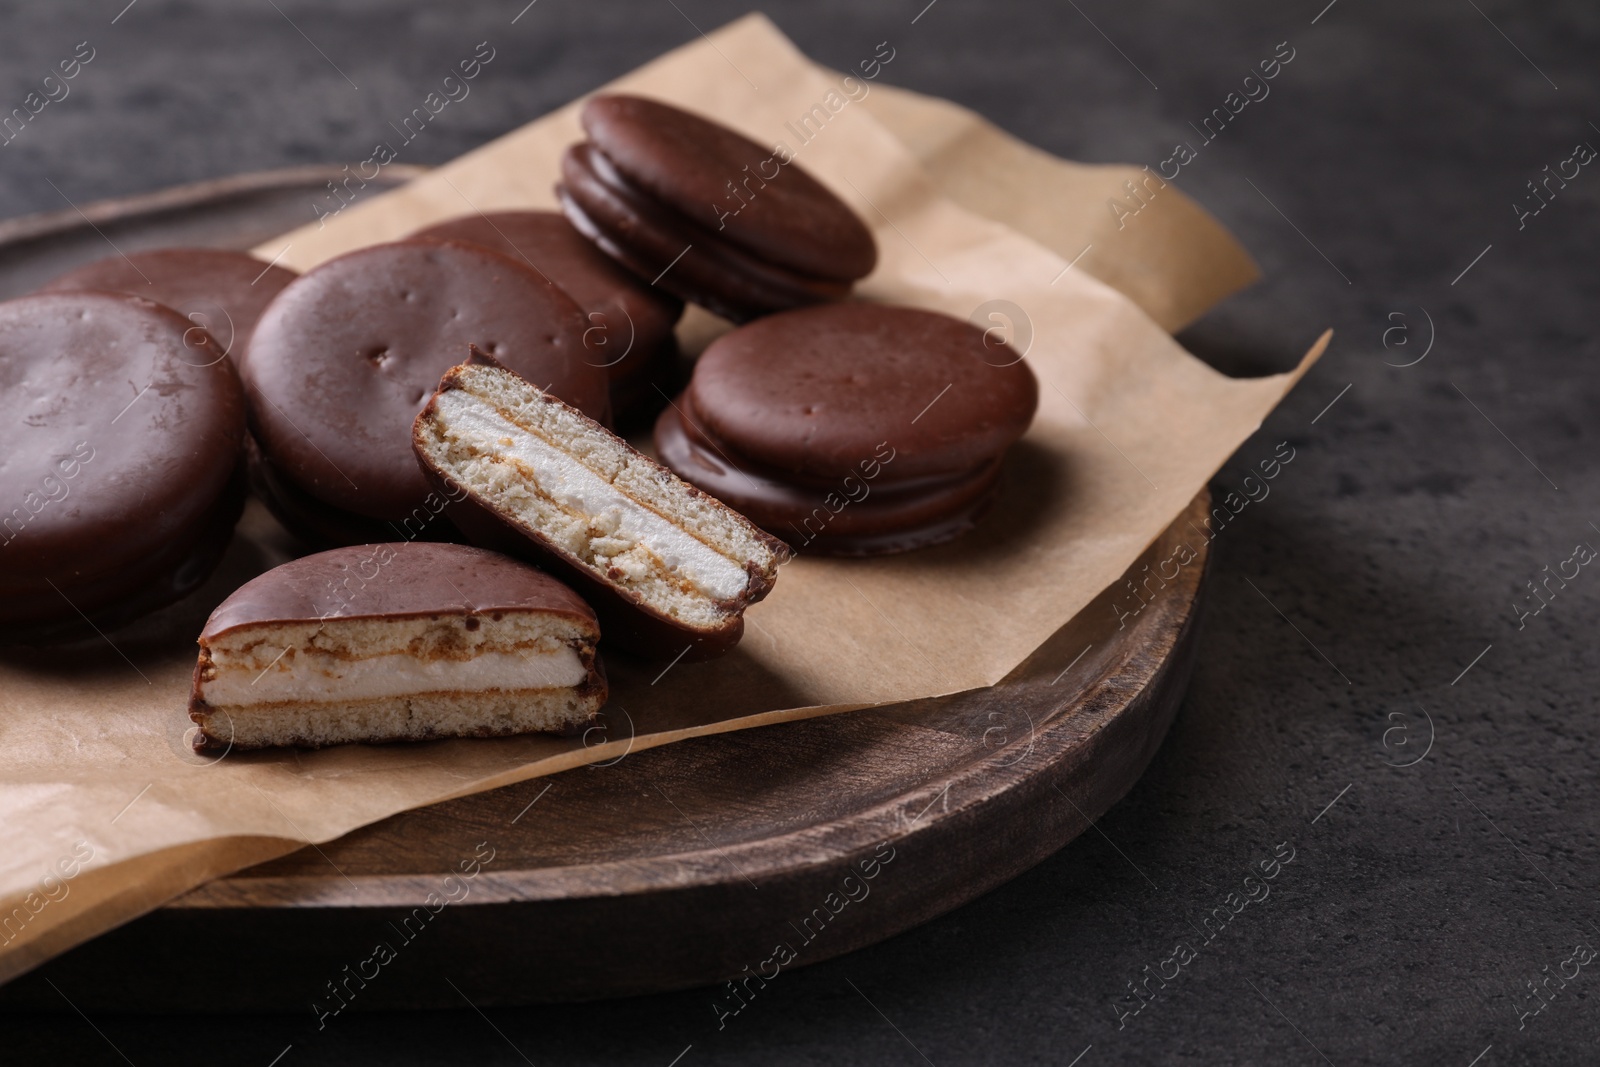 Photo of Tasty choco pies on grey table. Snack cakes